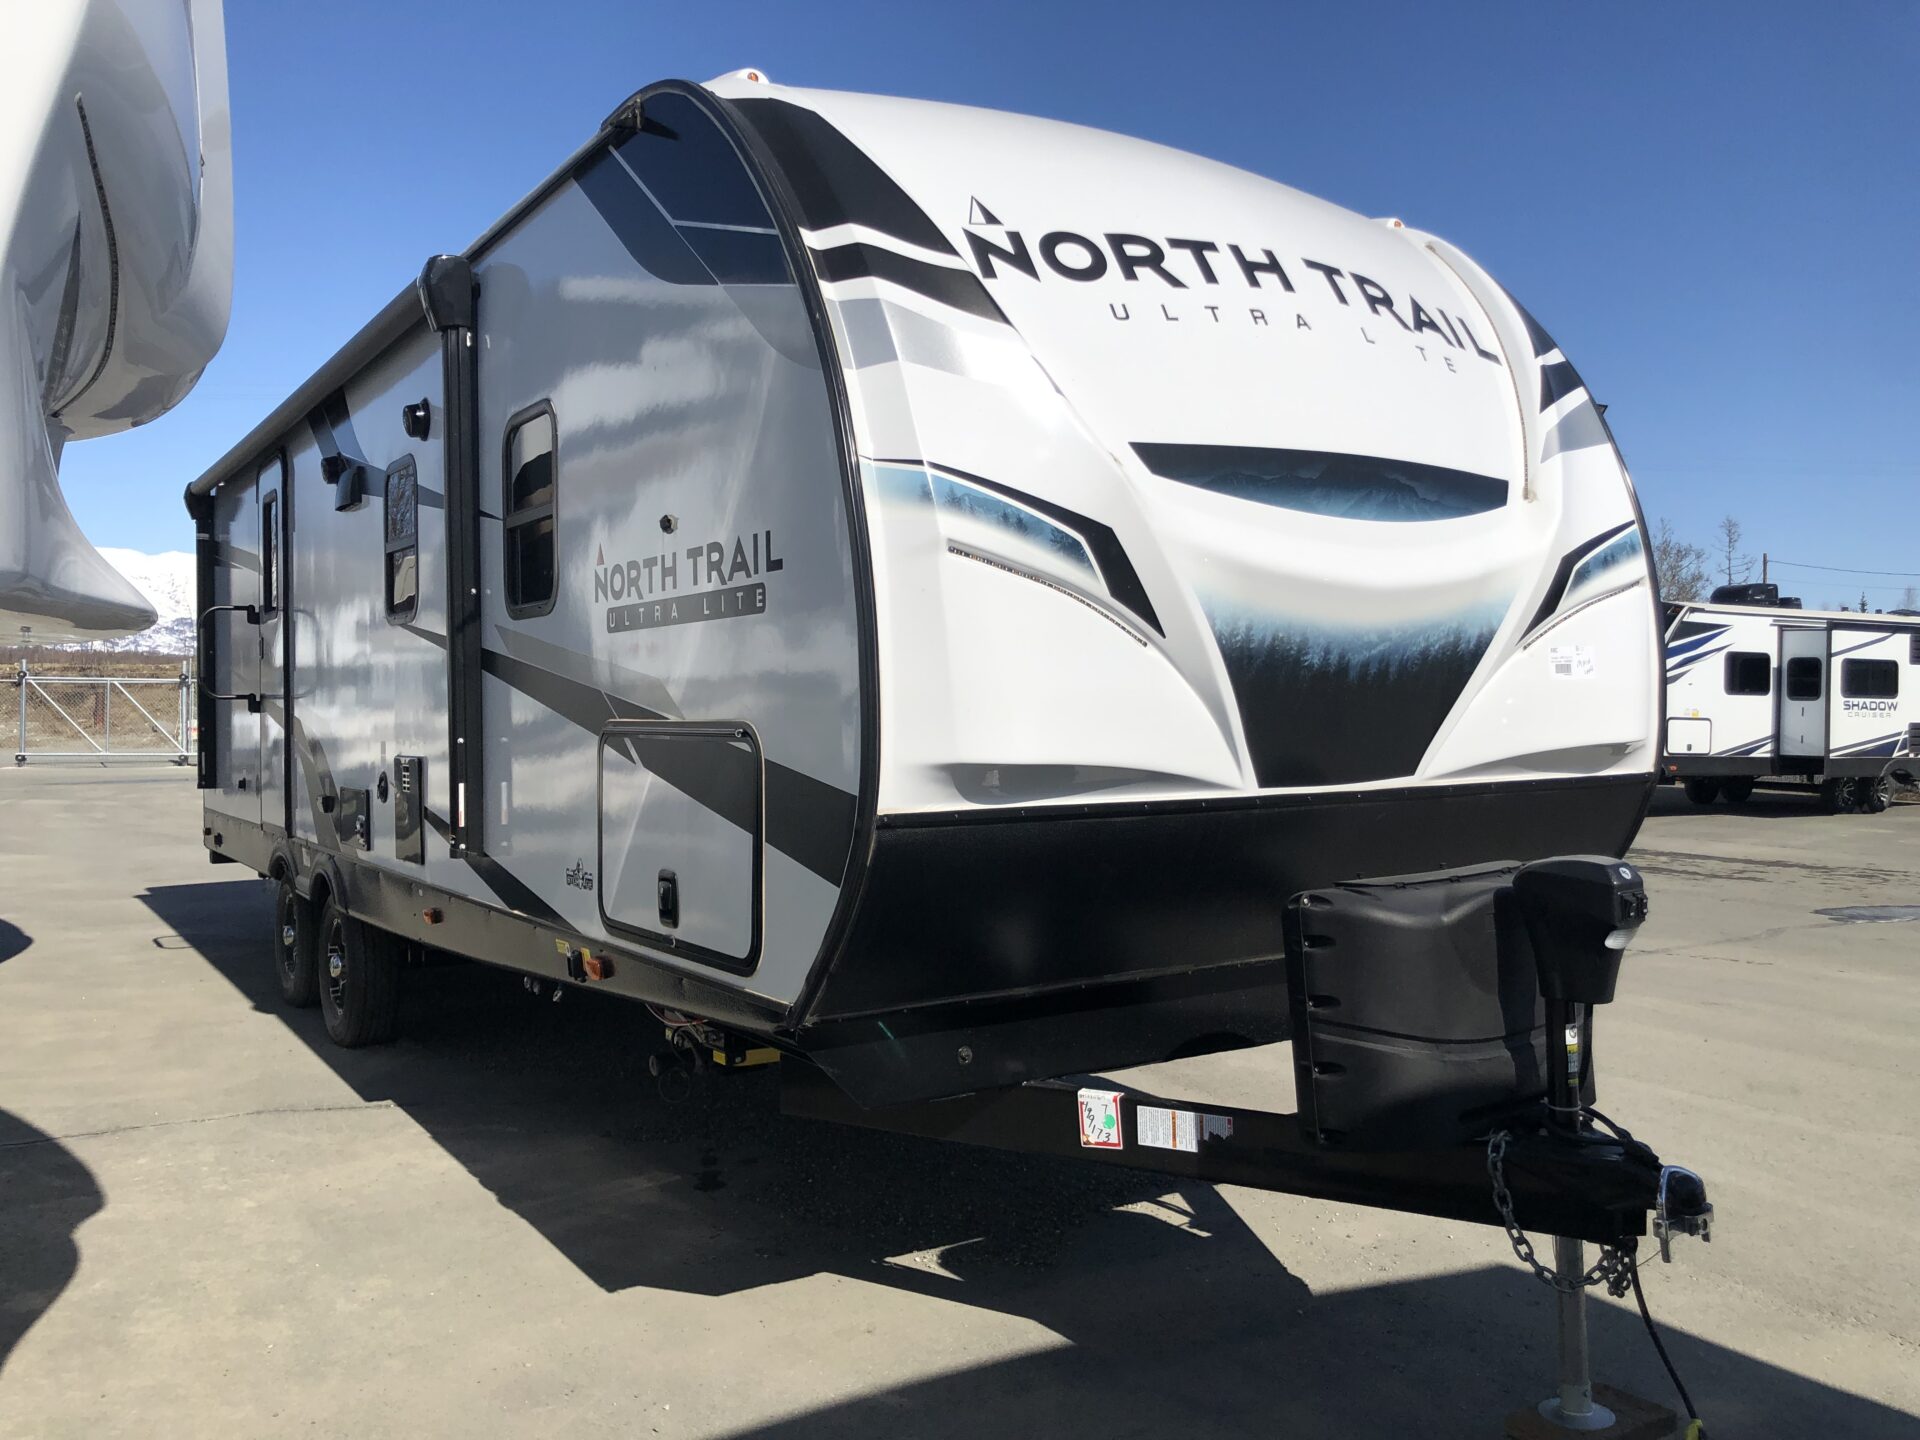 22 NORTH TRAIL 26DBS TRAVEL TRAILER with DOUBLE BUNKBEDS